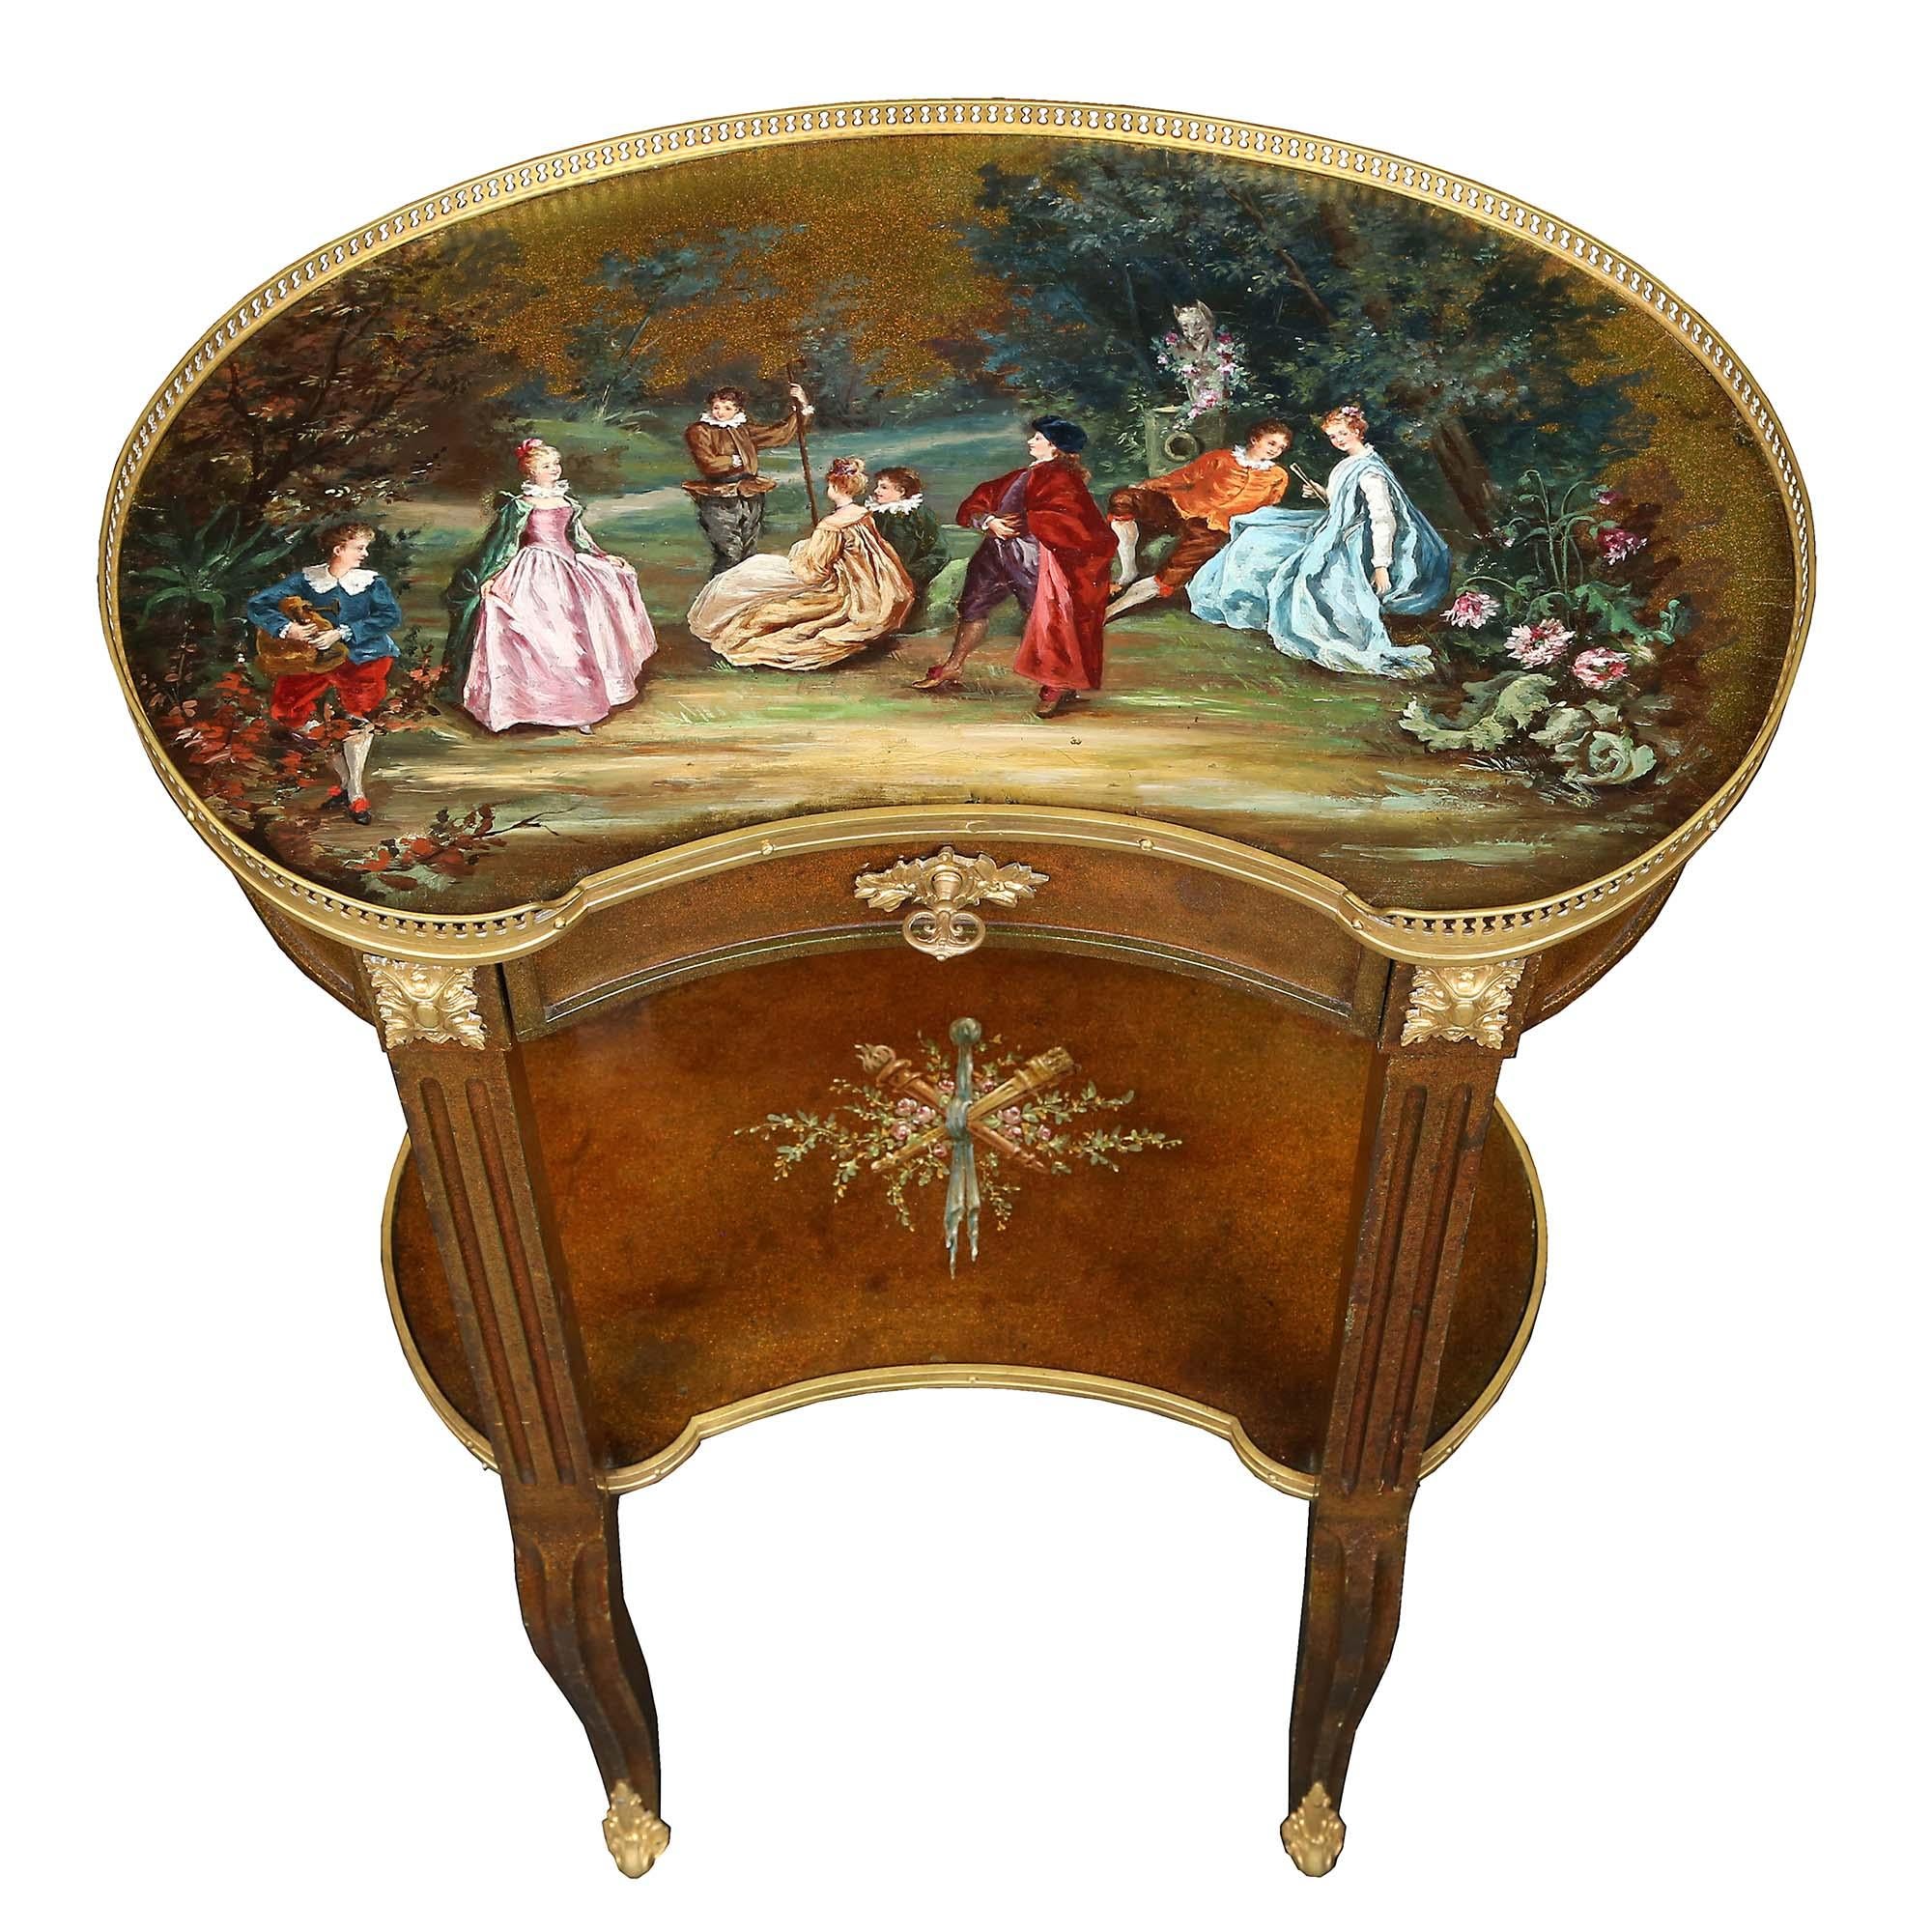 A very attractive French 19th century Louis XVI st., circa 1880, finely executed hand painted side table. Raised on cabriole legs with ormolu sabots joined by a kidney shaped tier with ormolu trim and central painted floral bouquet, with flame of